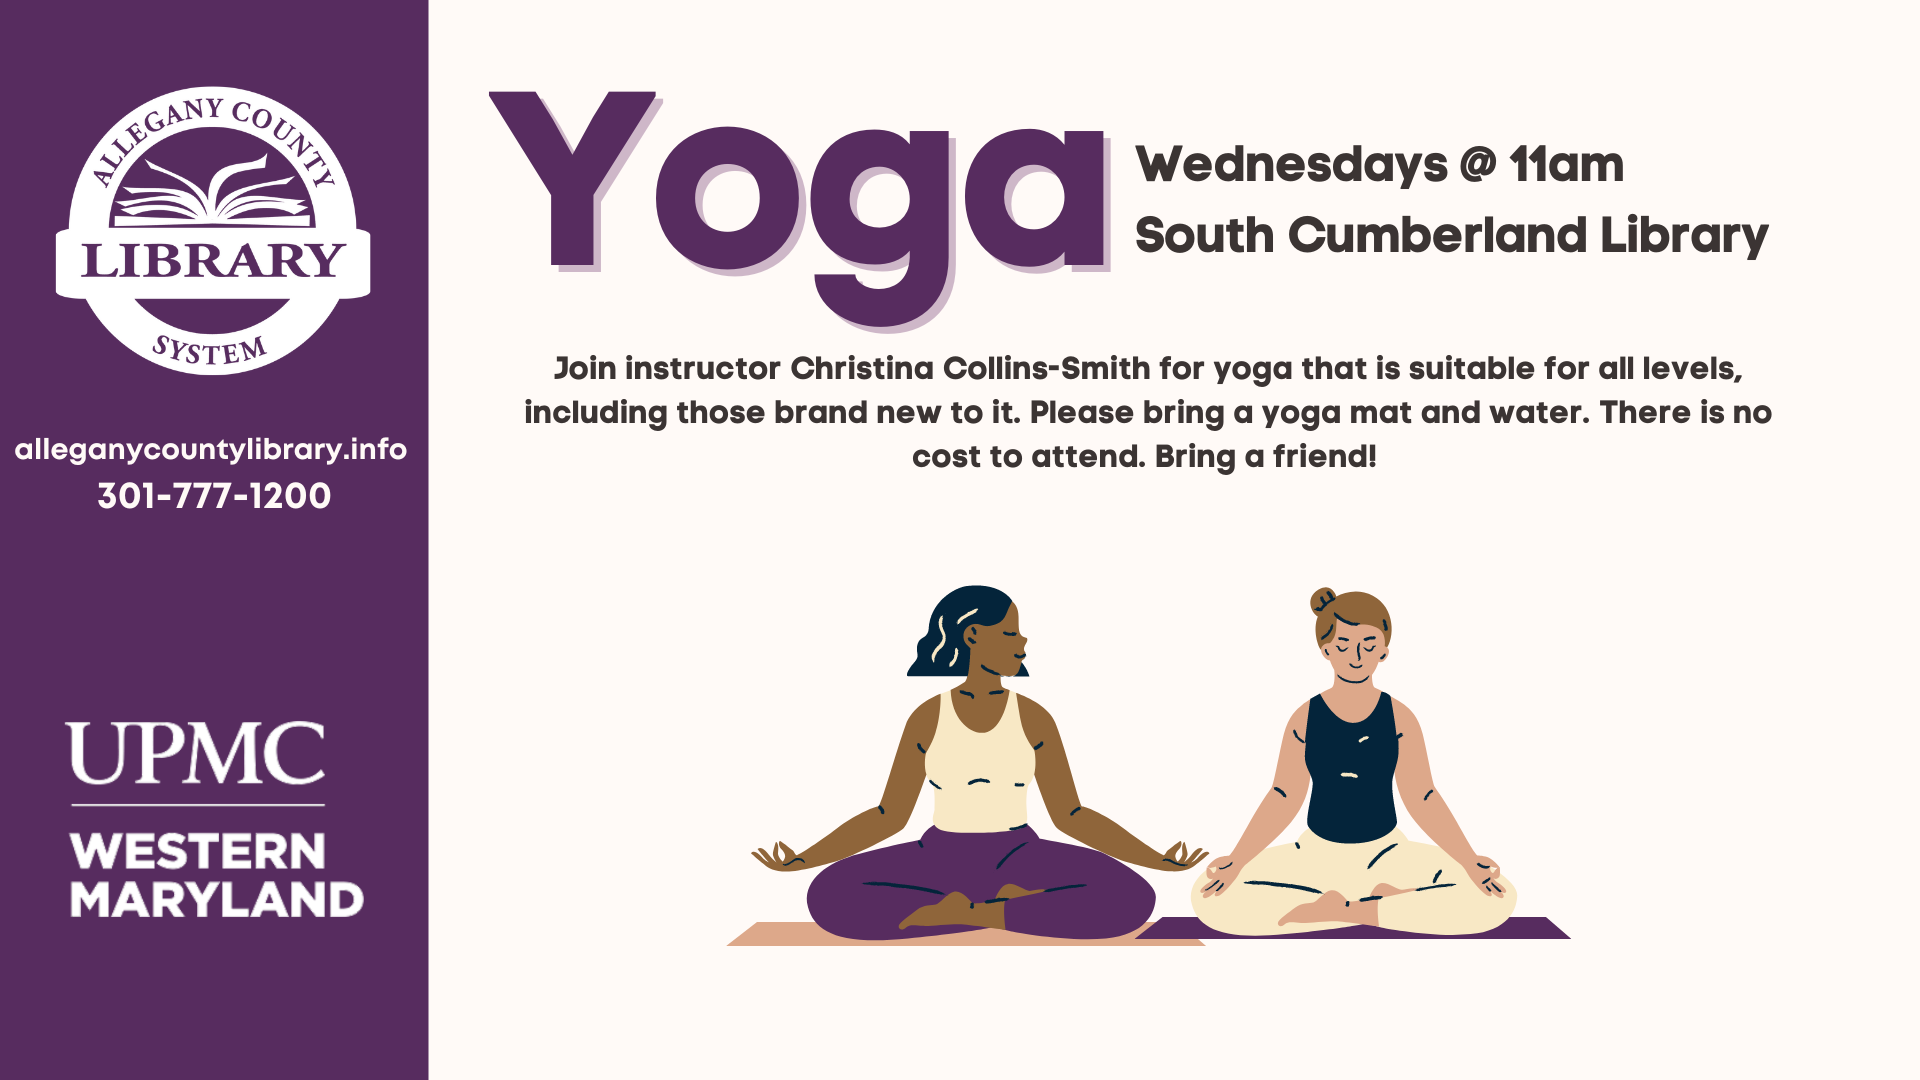 yoga event details with two cartoon women sitting on yoga mats